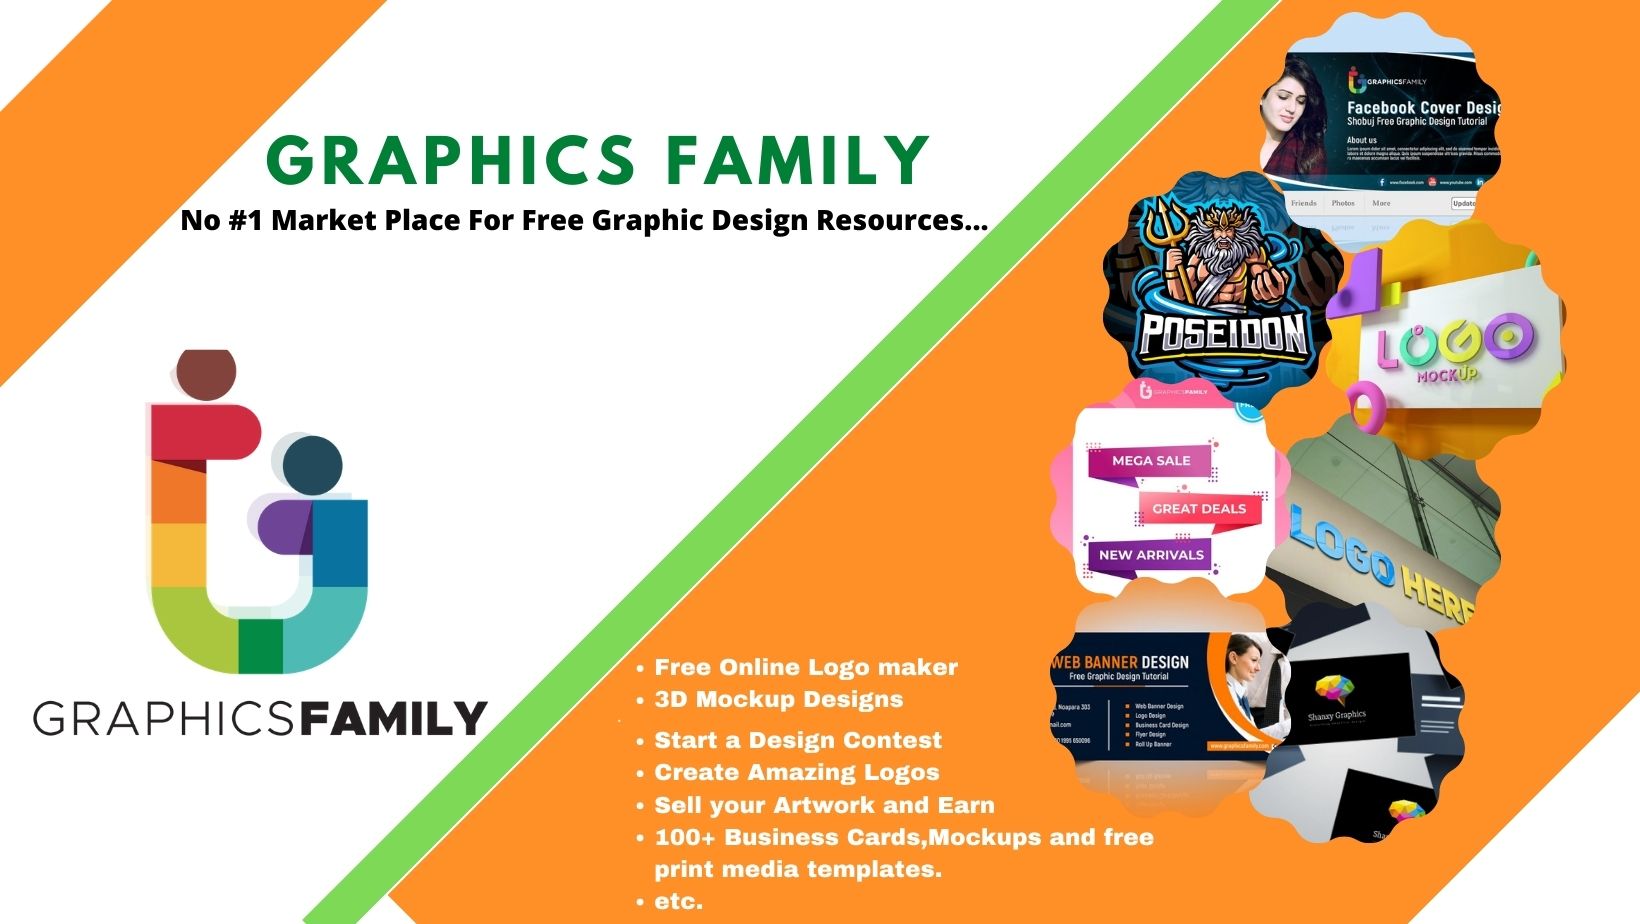 Graphics Family Facebook Cover